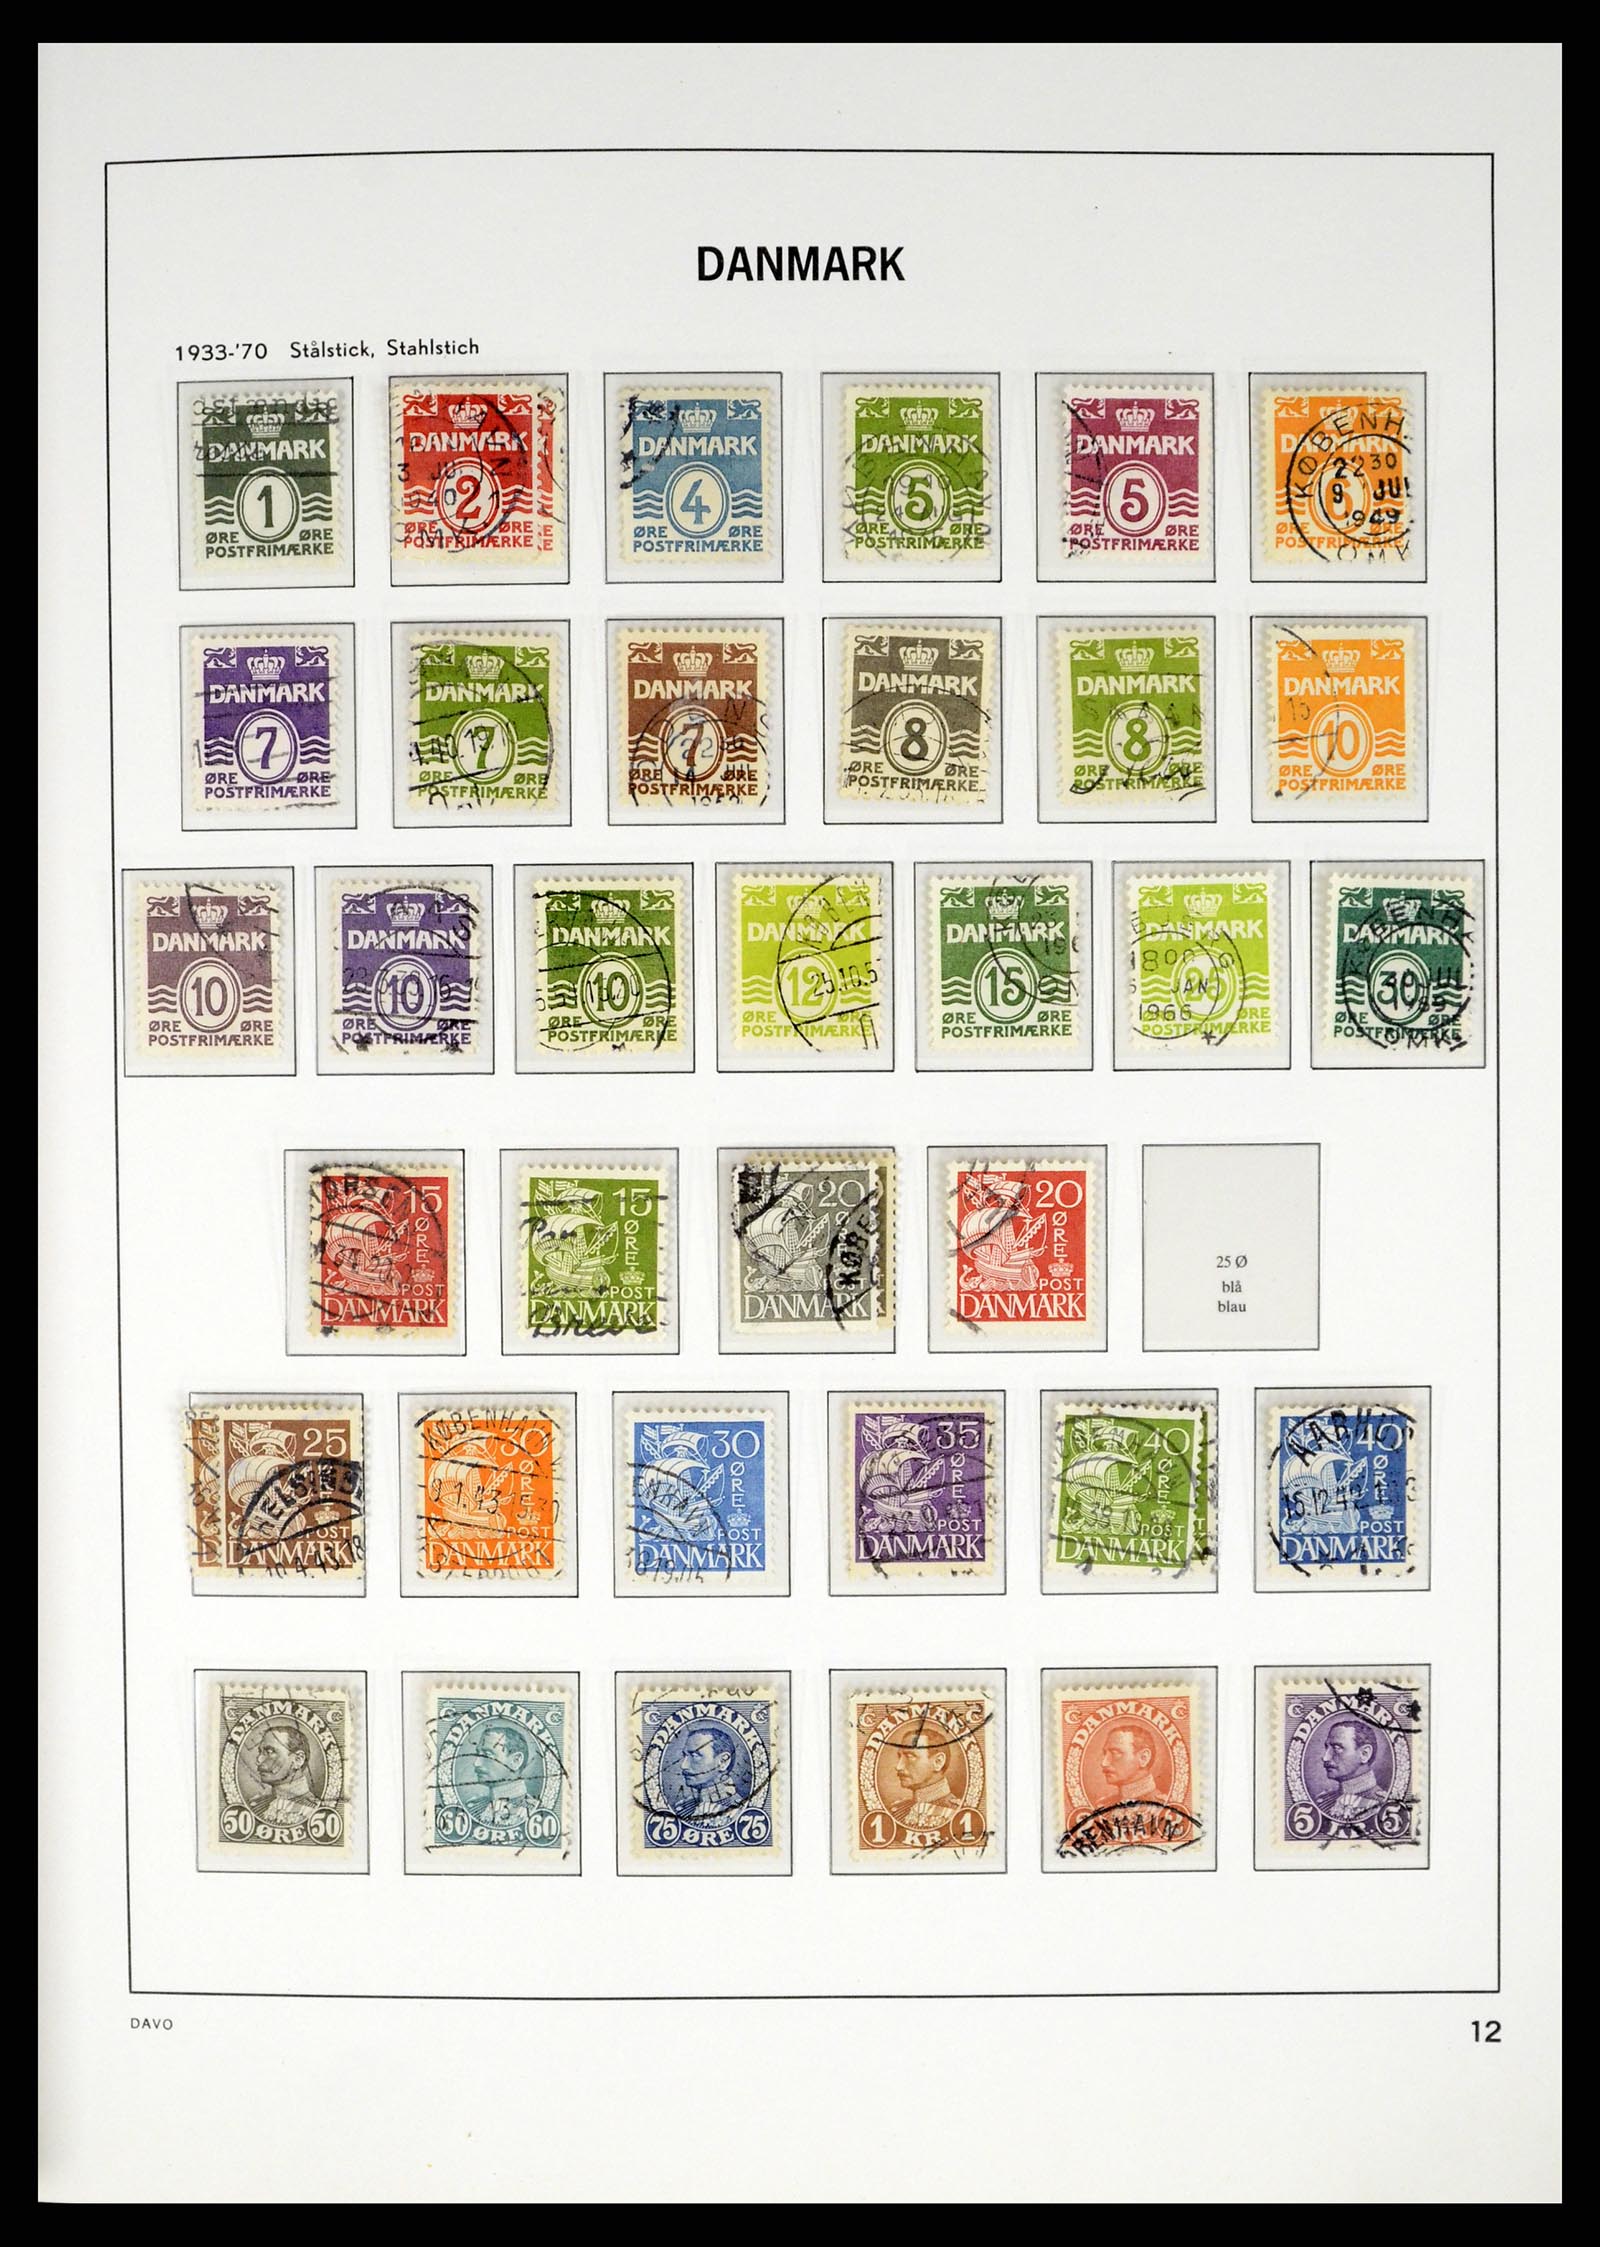 37383 012 - Stamp collection 37383 Denmark 1851-1969.